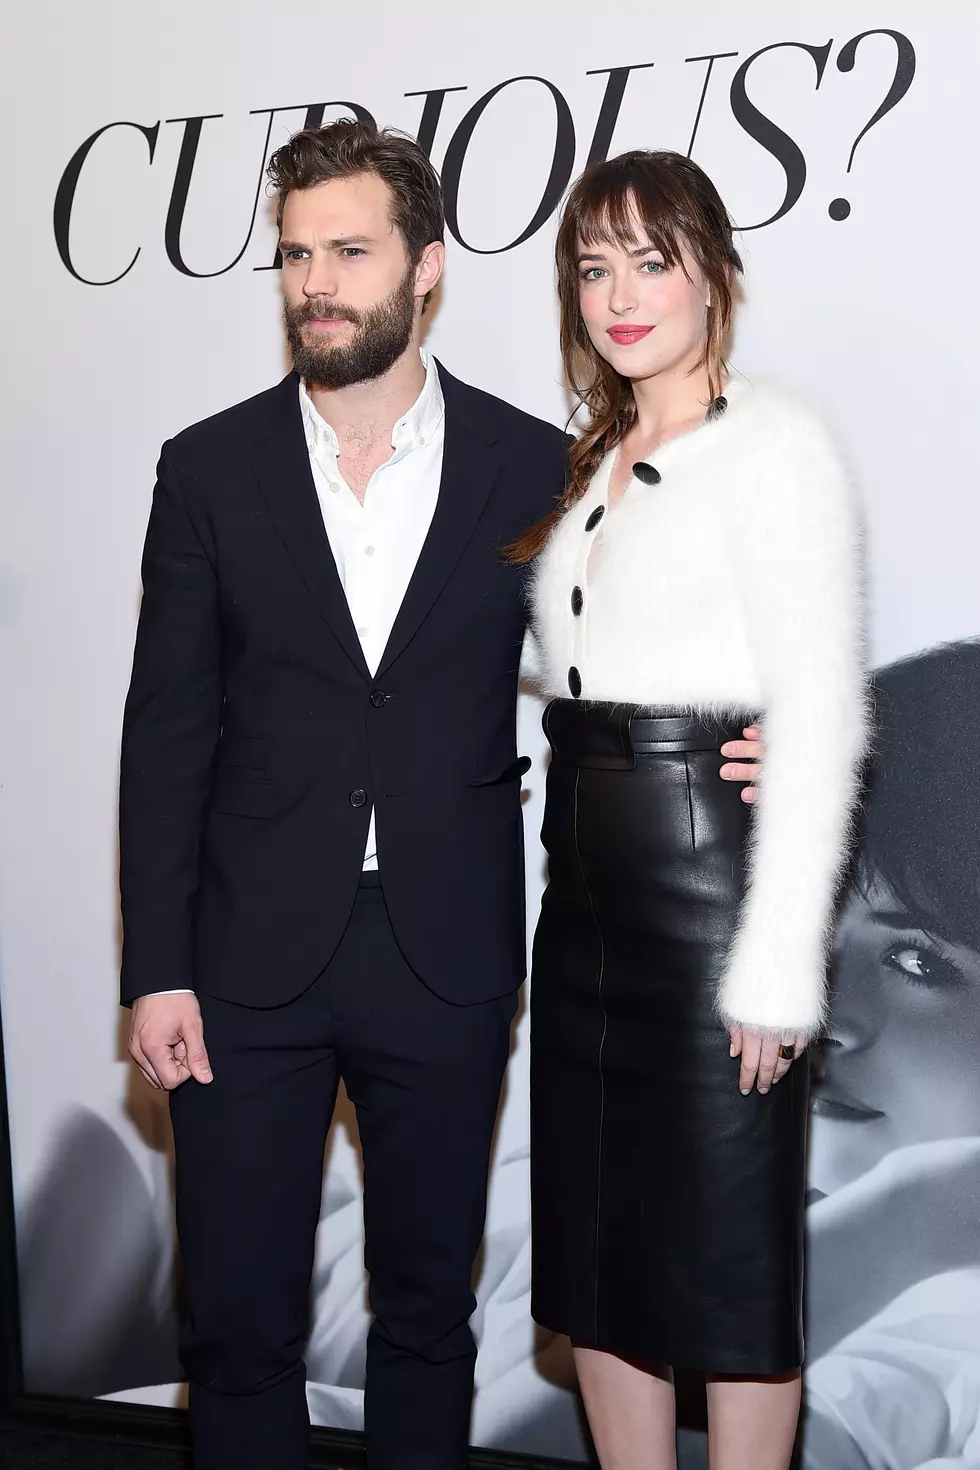 ‘Fifty Shades’ Count Down Begins!